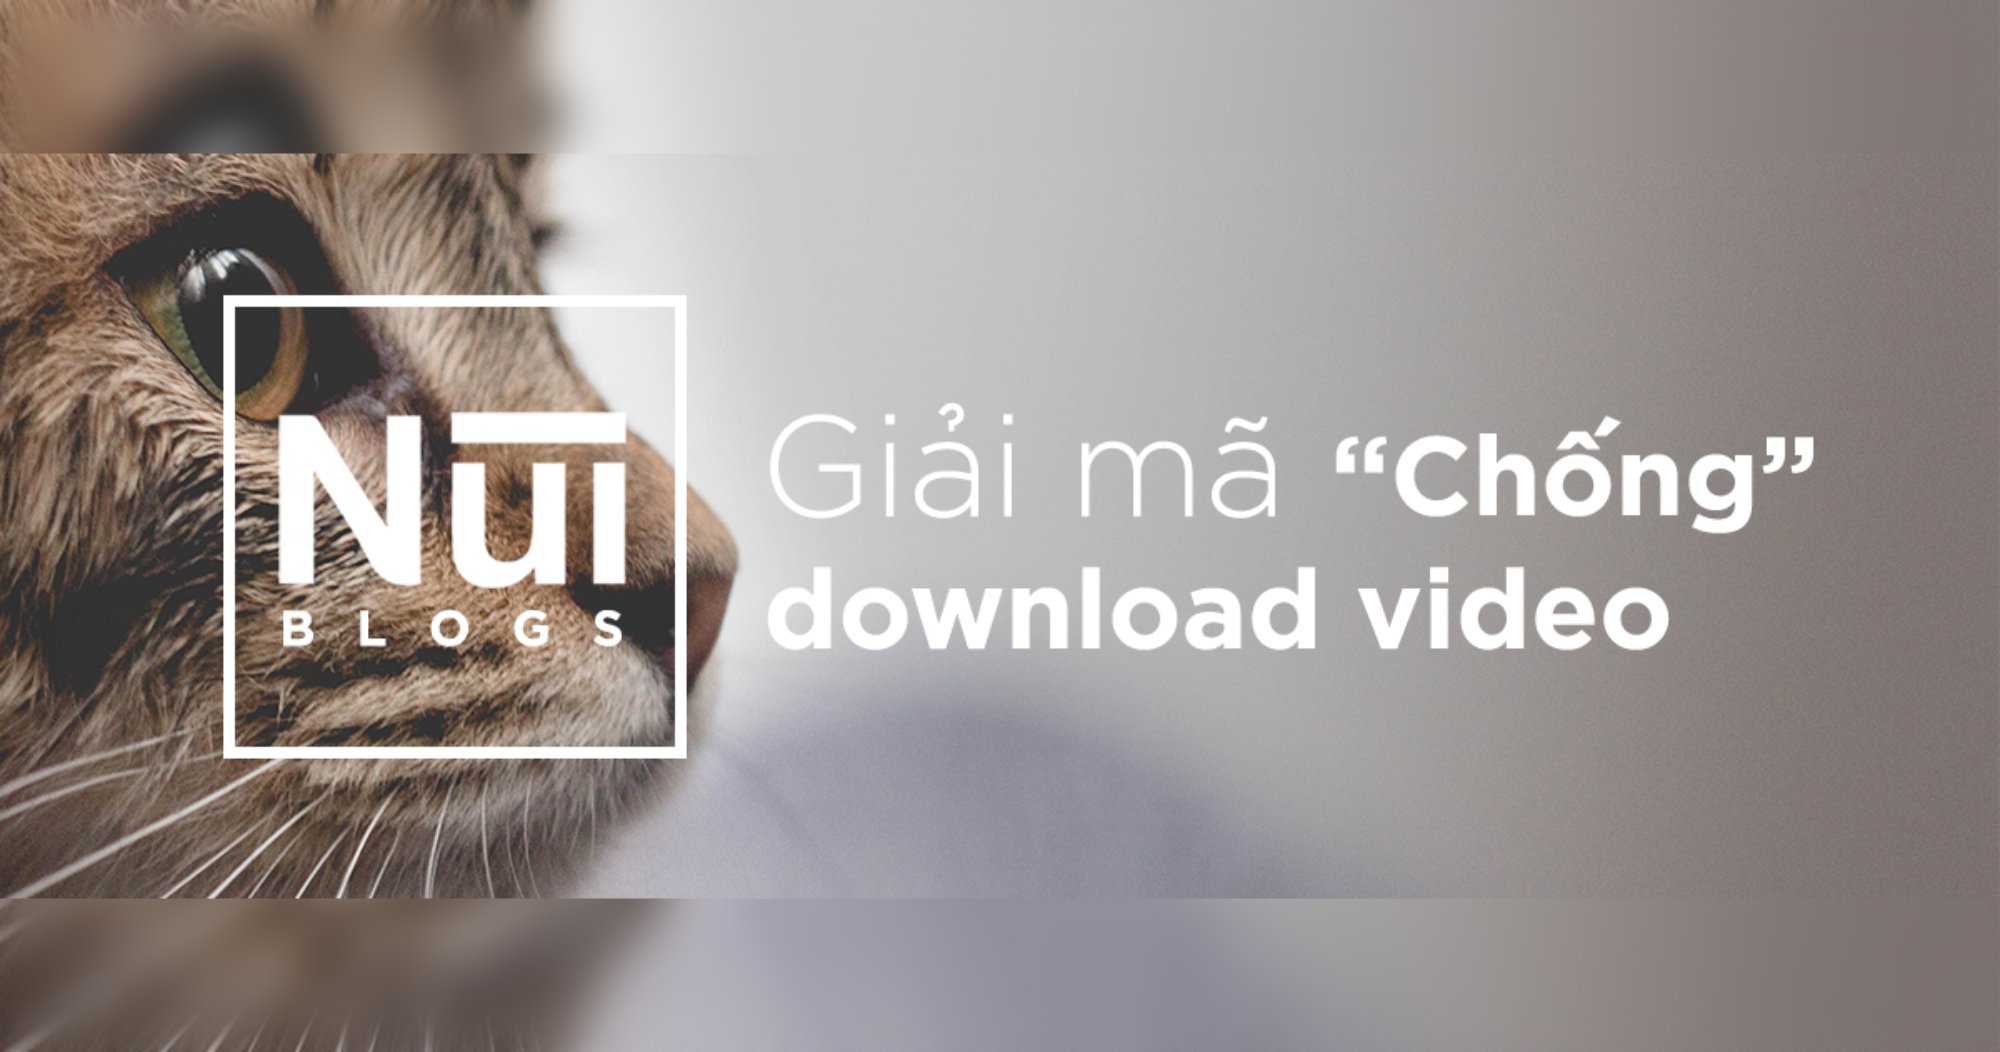 #29: "Chống" download video? 